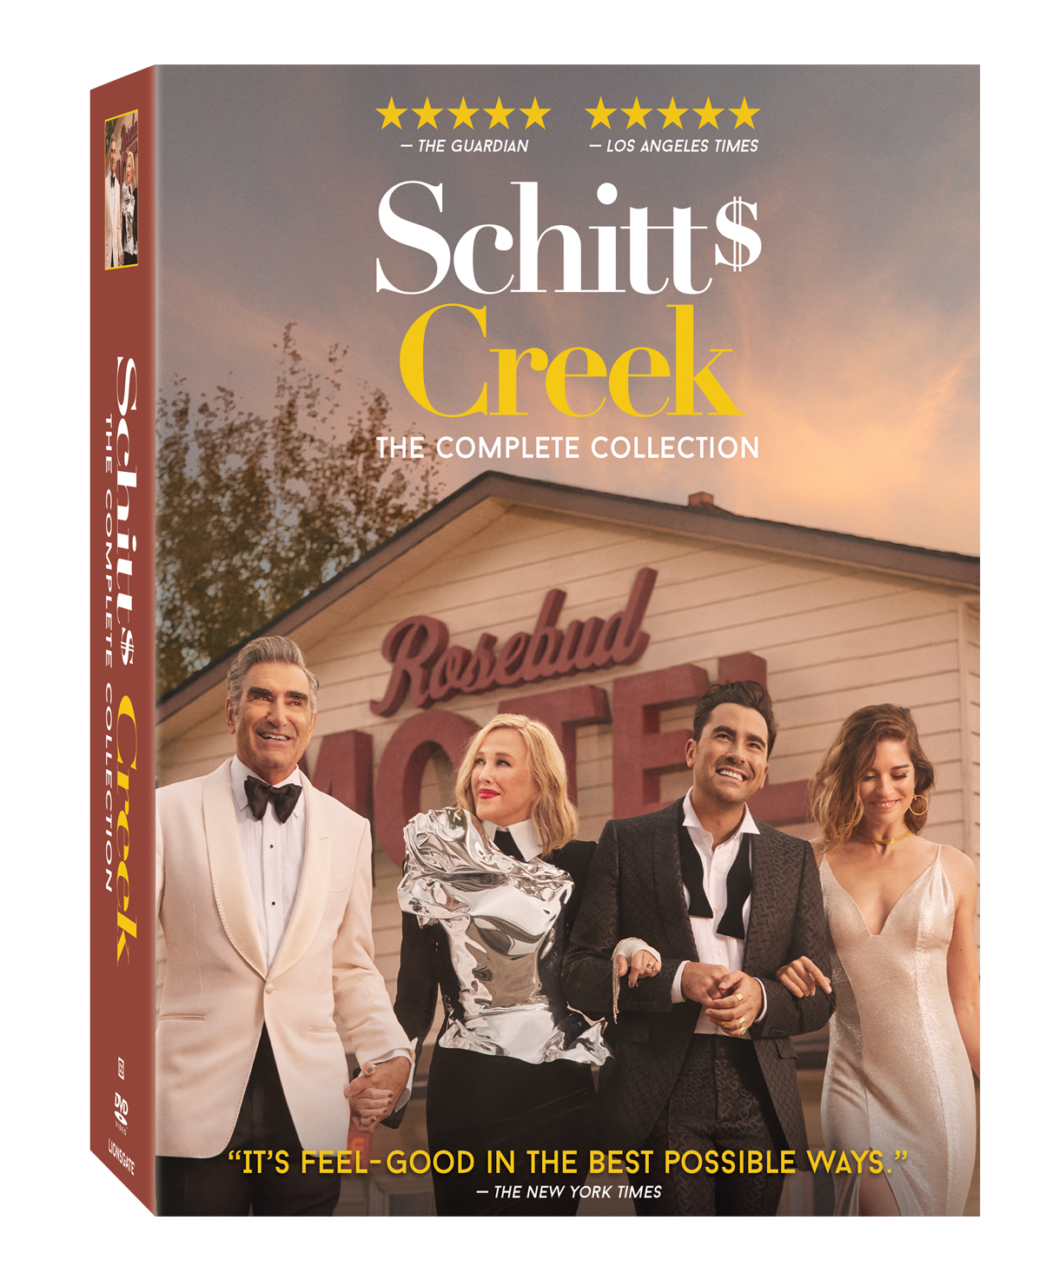 Schitt's Creek: The Complete Collection DVD cover (Lionsgate Home Entertainment)